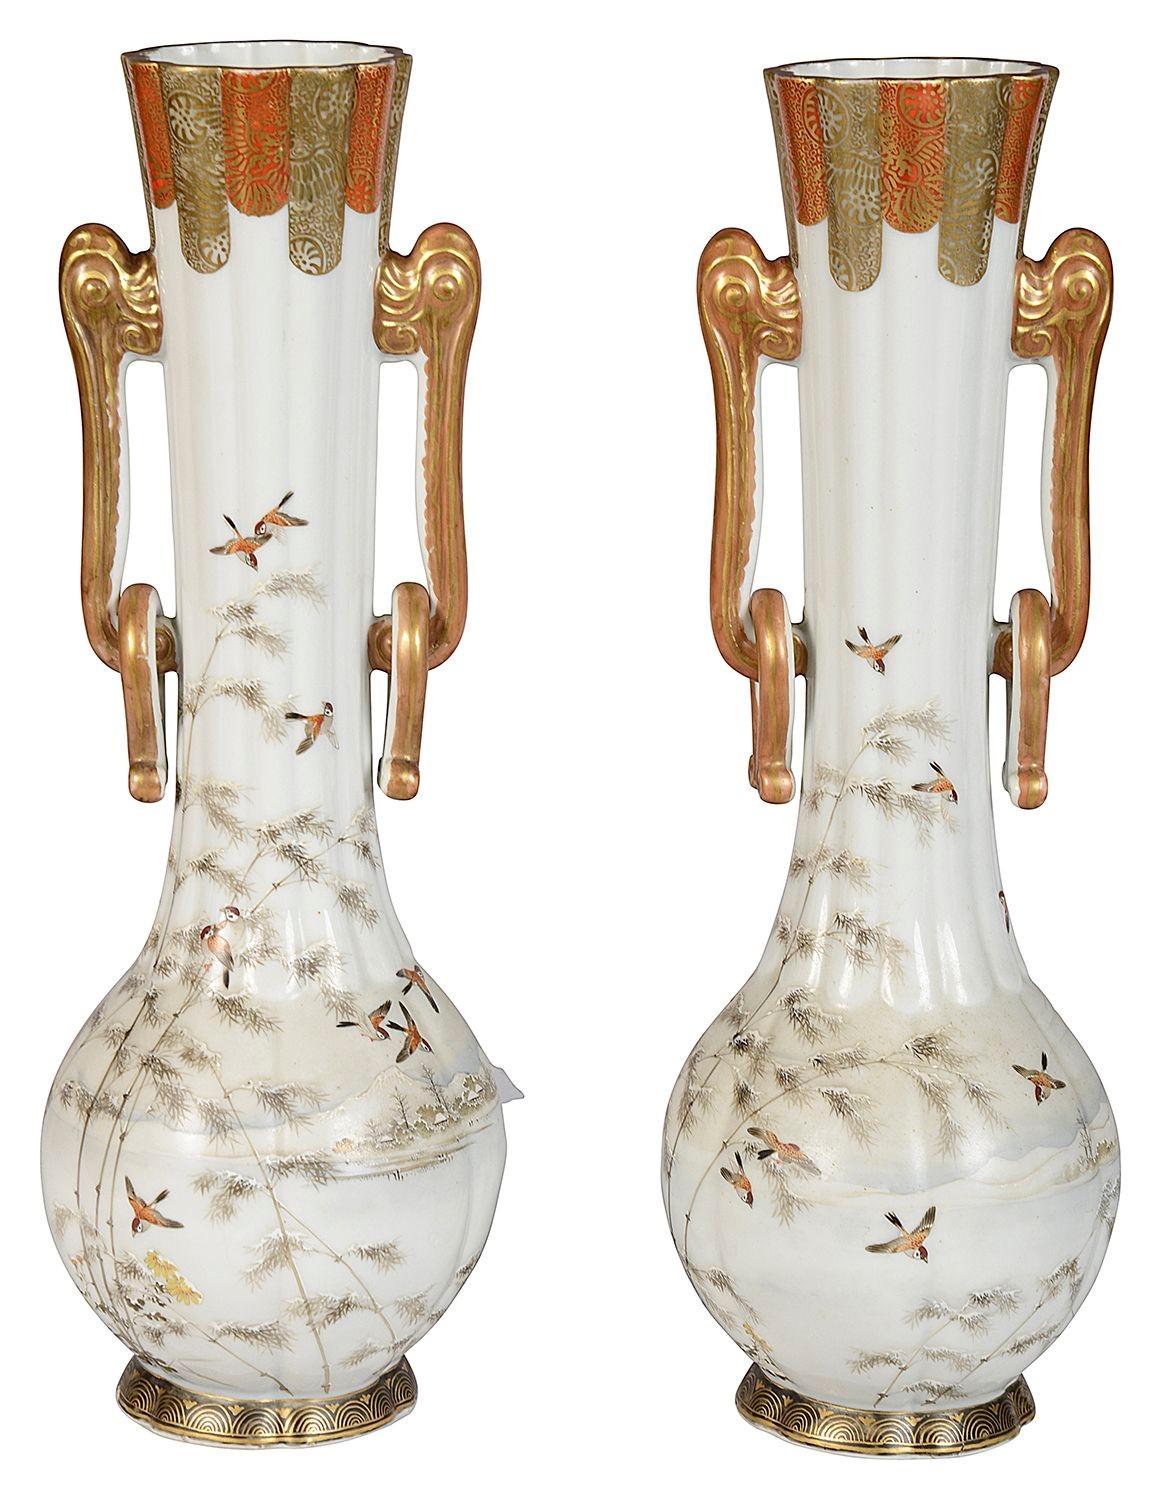 A fine quality pair of late 19th Century Japanese Kutani two handle vases / lamps. Each with wonderful hand painted scenes of Swifts flying through in air, with mountains and lakes in the background. Classical orange and gilt motifs to the neck and